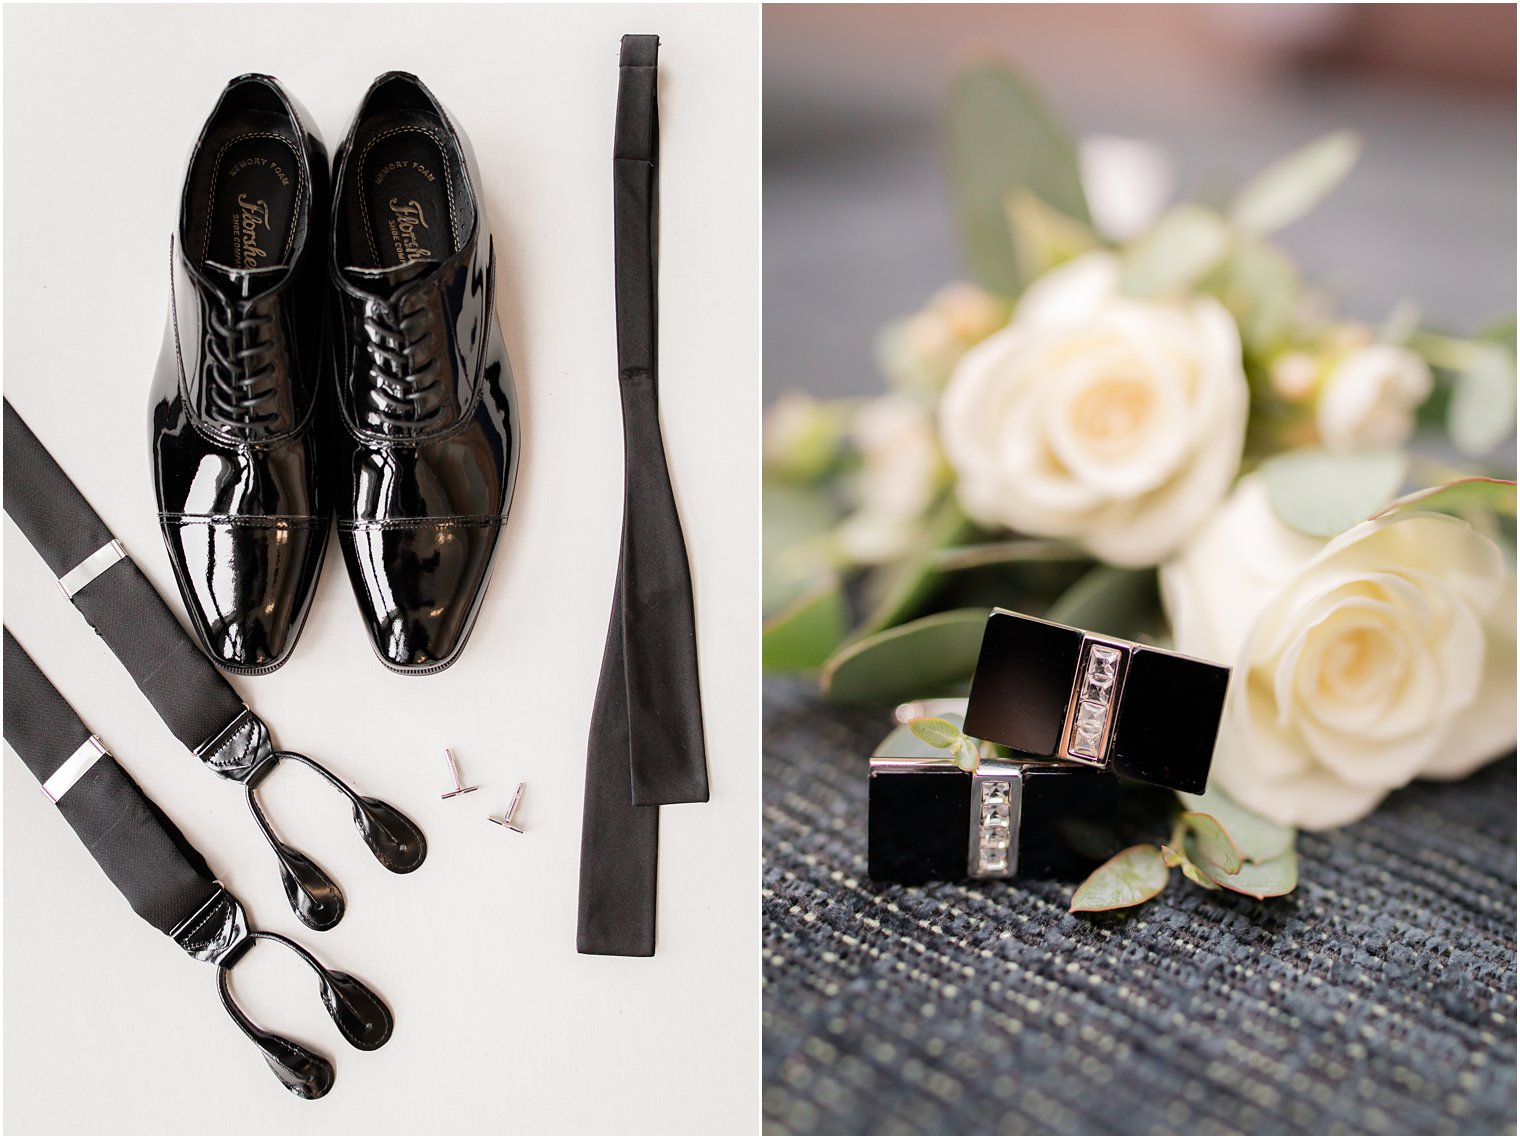 Groom's boutonniere by Crest Florist with his shoes, suspenders, and black tie